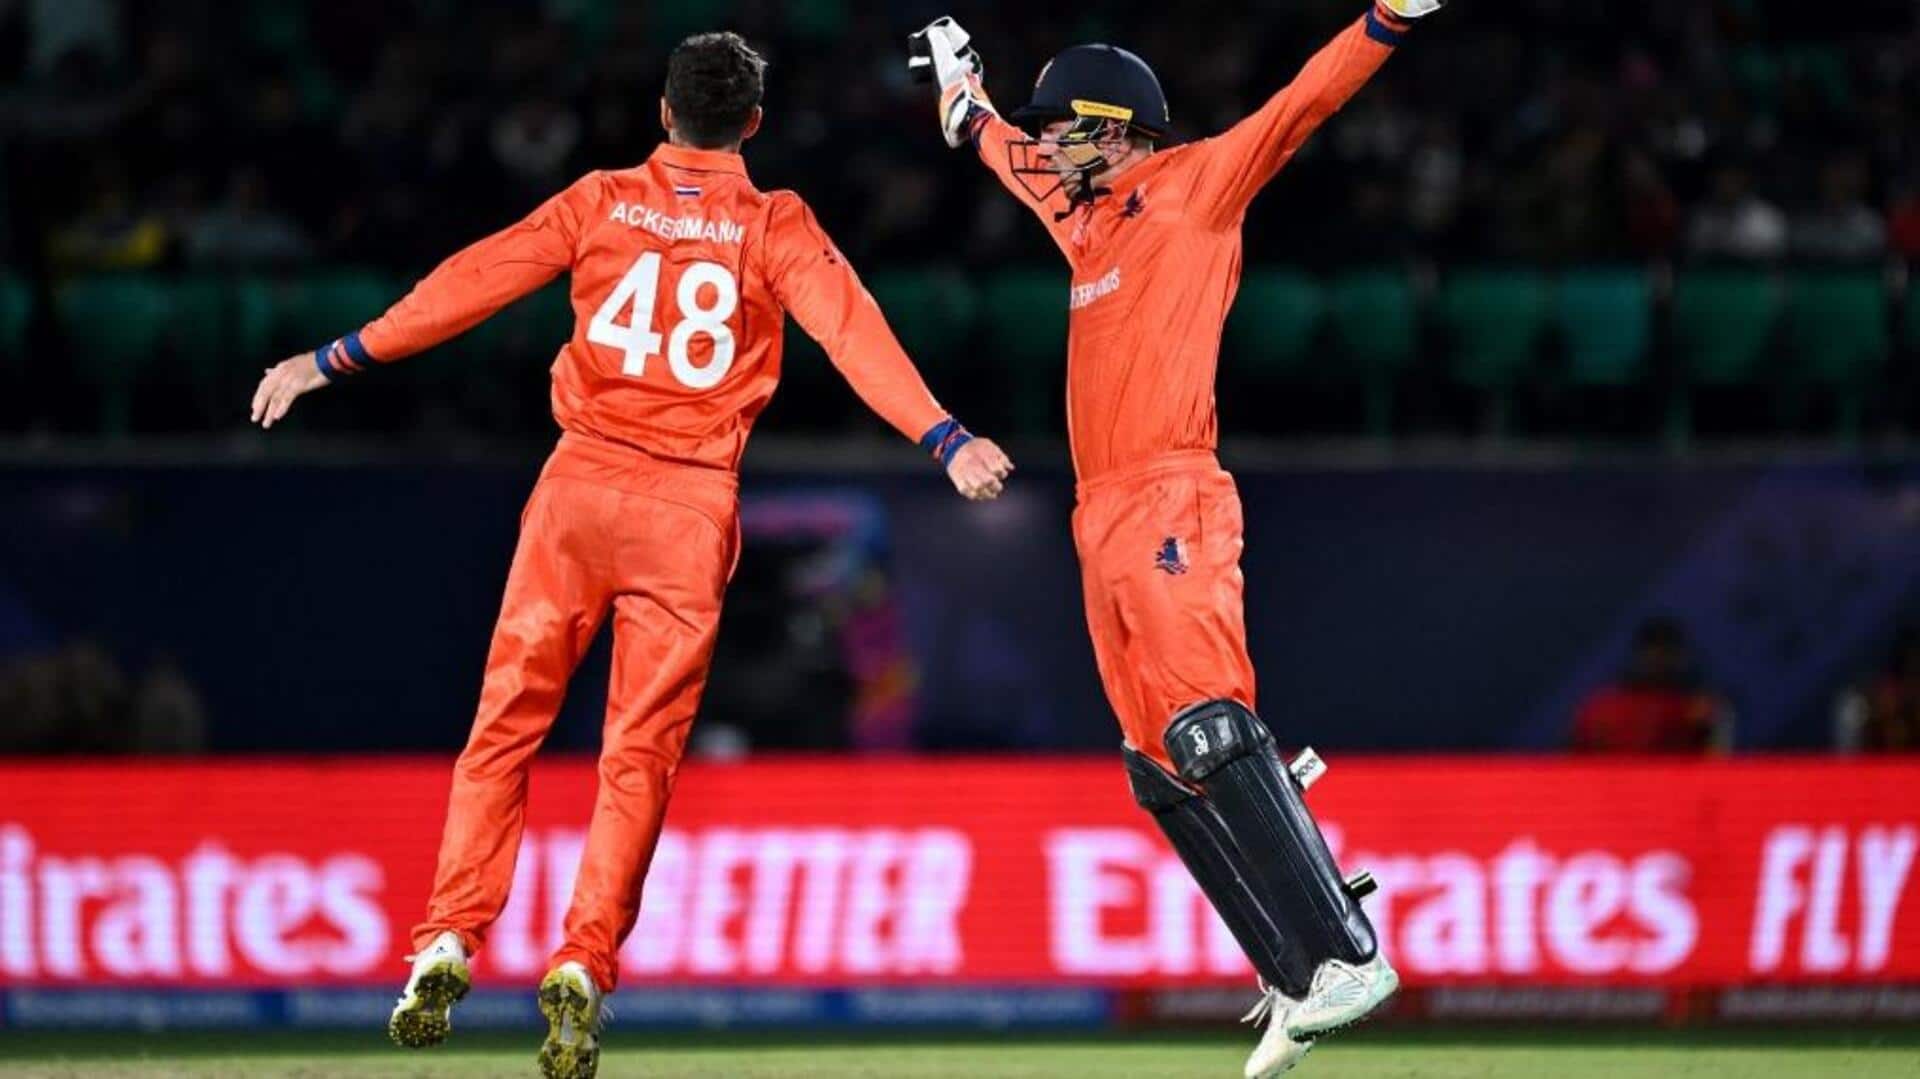 Netherlands claim their third World Cup win after upsetting SA